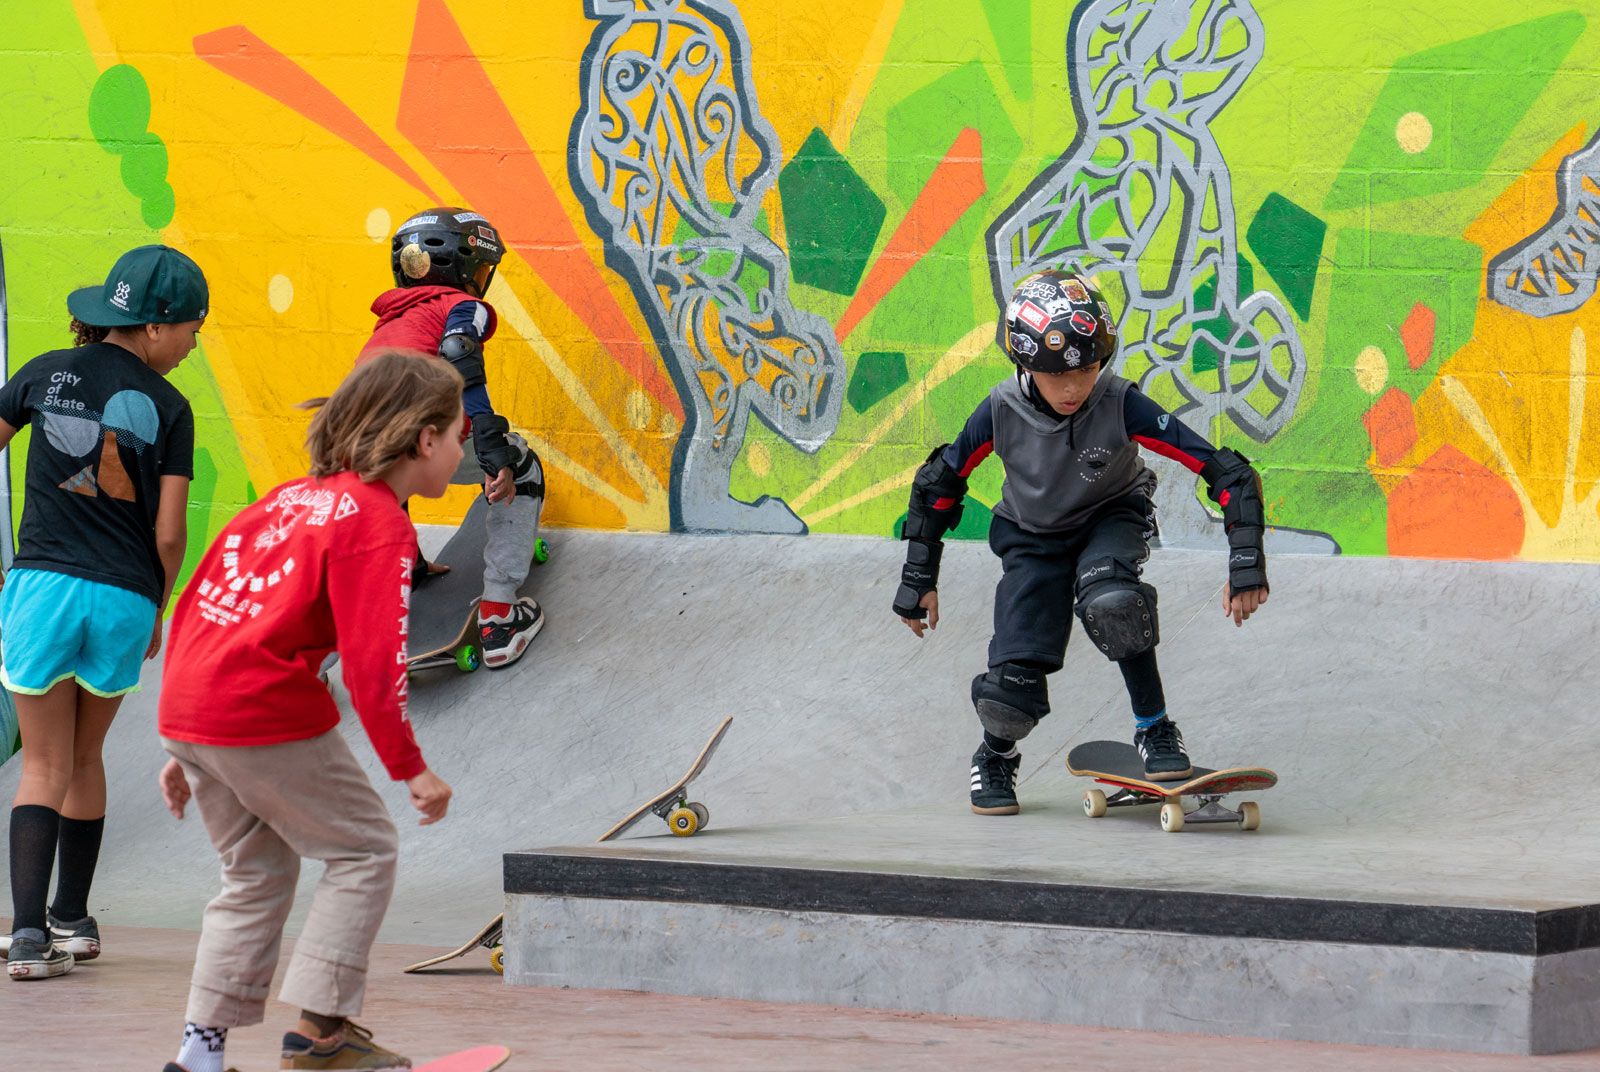 Young people riding skateboards in a skate plaza